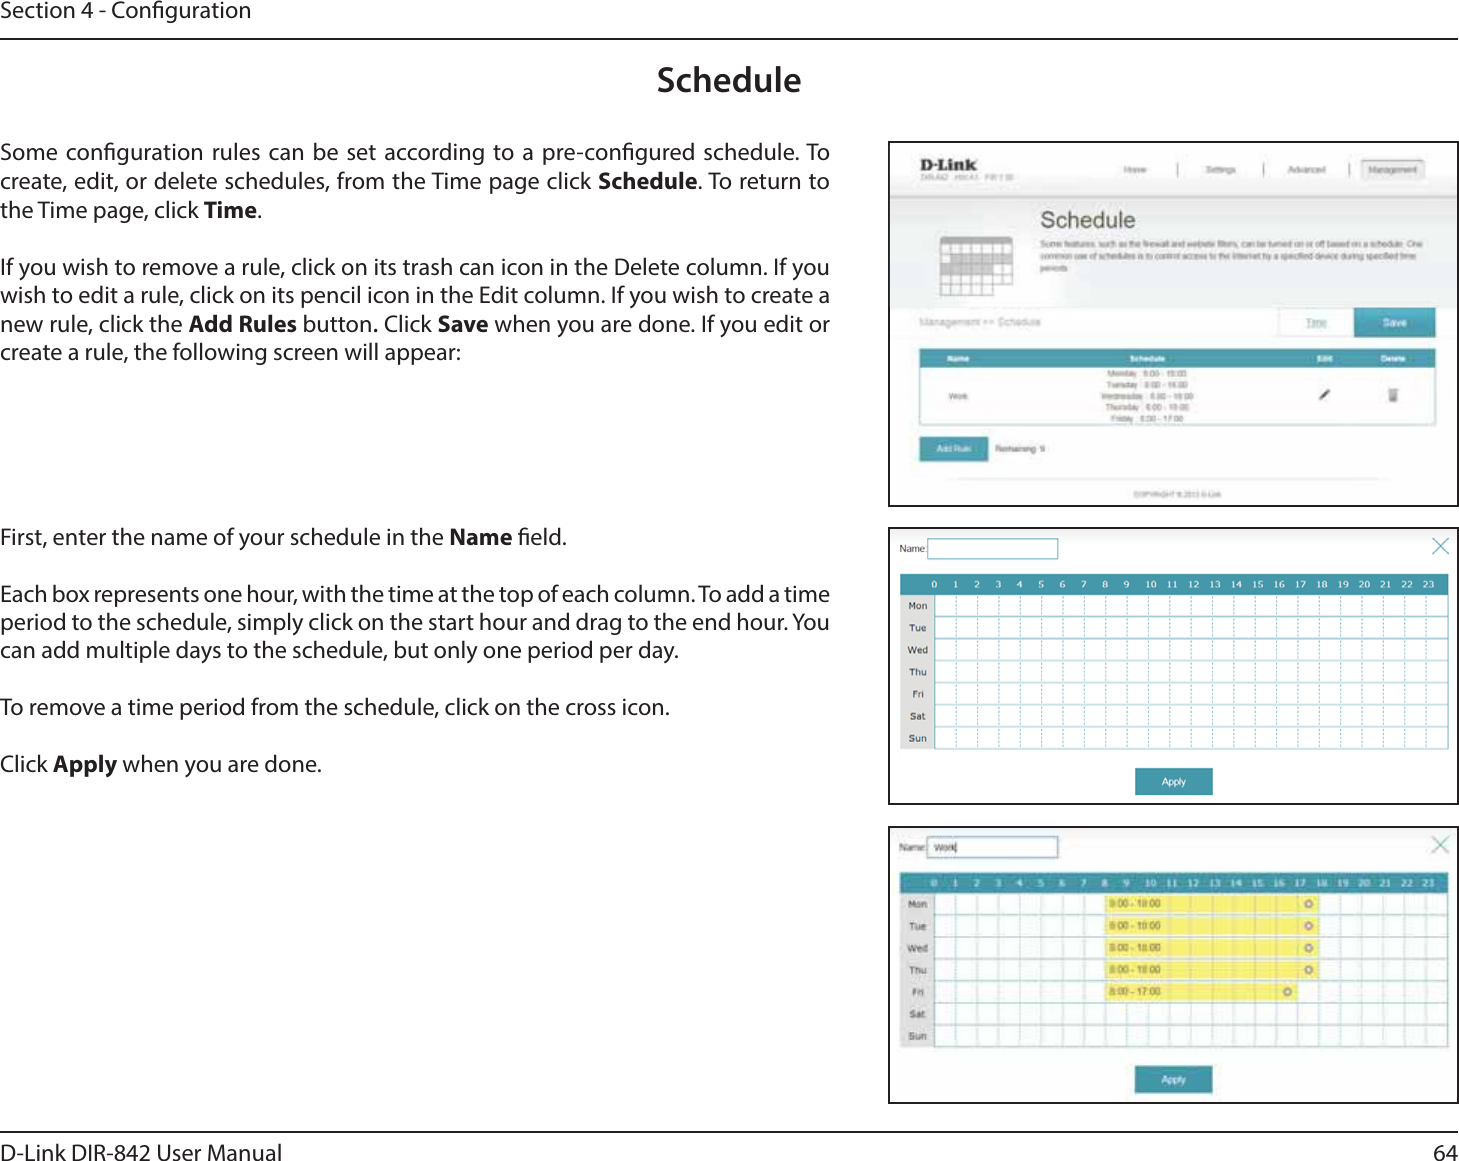 64D-Link DIR-842 User ManualSection 4 - CongurationScheduleSome conguration rules can be set according to a pre-congured schedule. To create, edit, or delete schedules, from the Time page click Schedule. To return to the Time page, click Time. If you wish to remove a rule, click on its trash can icon in the Delete column. If you wish to edit a rule, click on its pencil icon in the Edit column. If you wish to create a new rule, click the &quot;EE3VMFTbutton. Click Save when you are done. If you edit or create a rule, the following screen will appear:First, enter the name of your schedule in the Name eld.Each box represents one hour, with the time at the top of each column. To add a time QFSJPEUPUIFTDIFEVMFTJNQMZDMJDLPOUIFTUBSUIPVSBOEESBHUPUIFFOEIPVS:PVcan add multiple days to the schedule, but only one period per day.To remove a time period from the schedule, click on the cross icon.Click &quot;QQMZ when you are done.